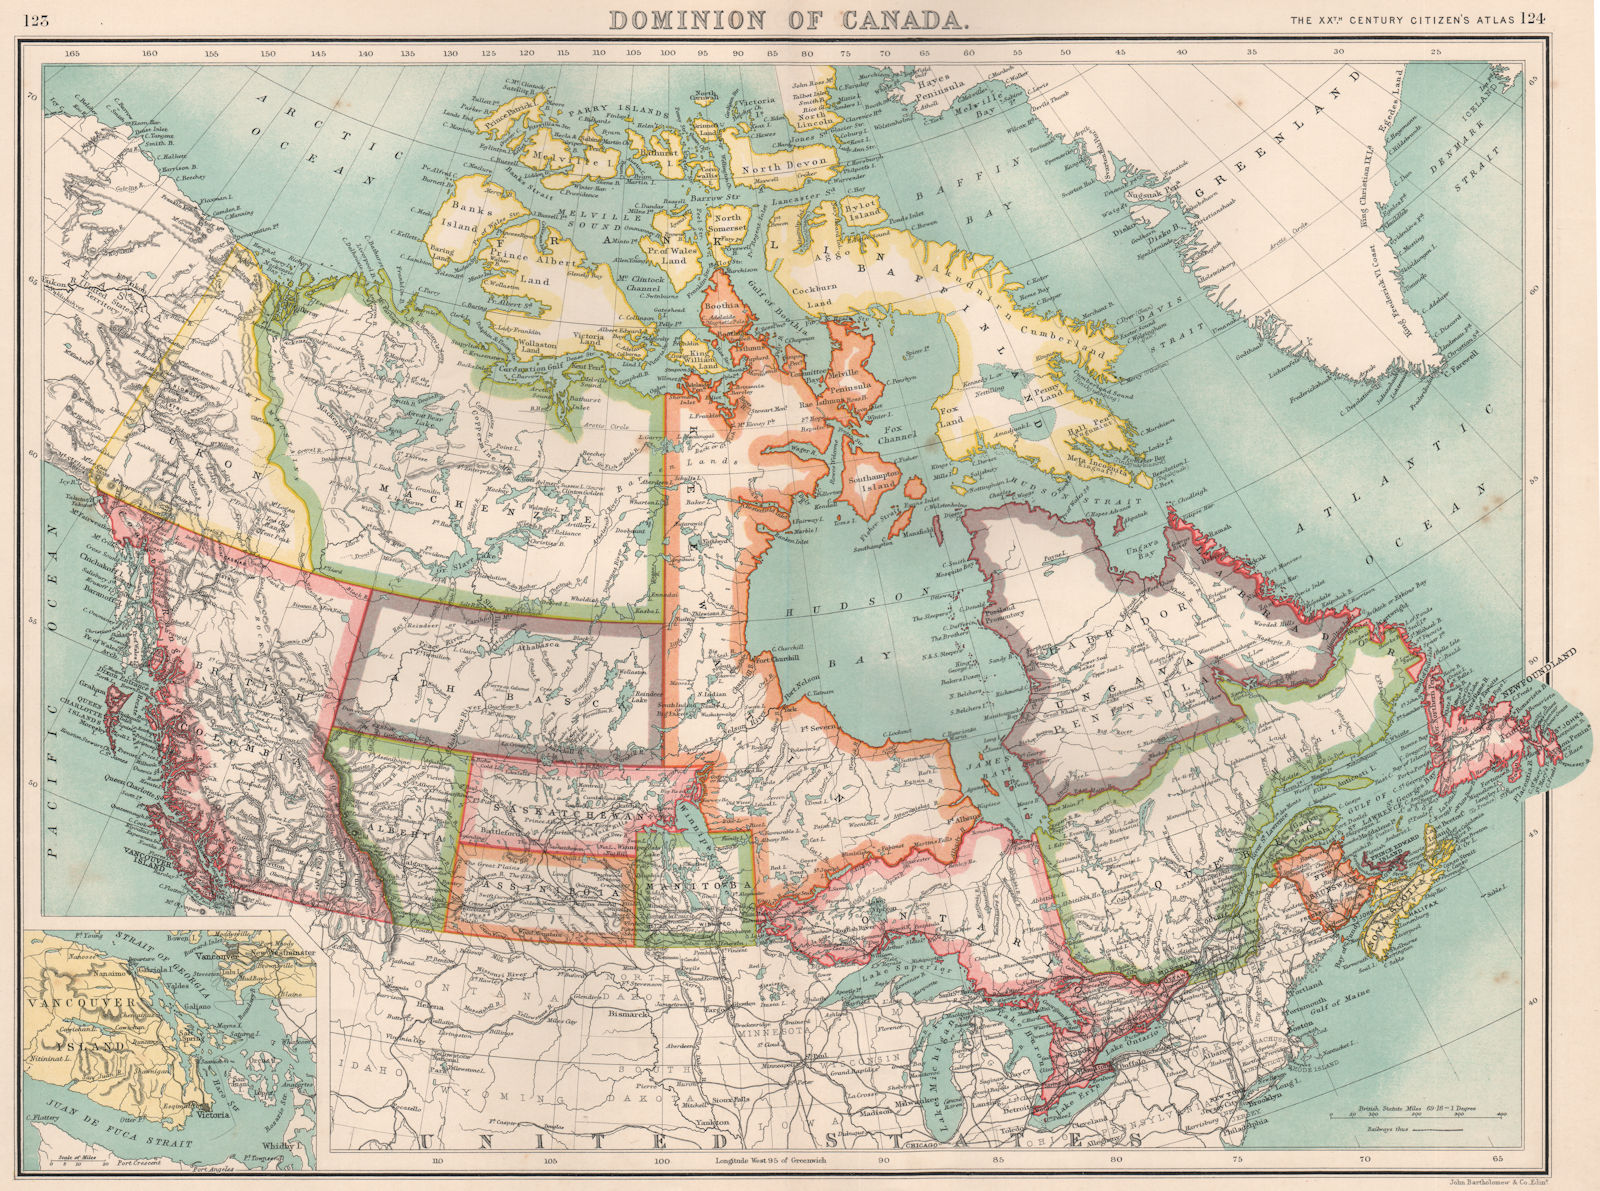 CANADA.Shows MacKenzie Keewatin Athabasca Assiniboia Franklin districts 1901 map